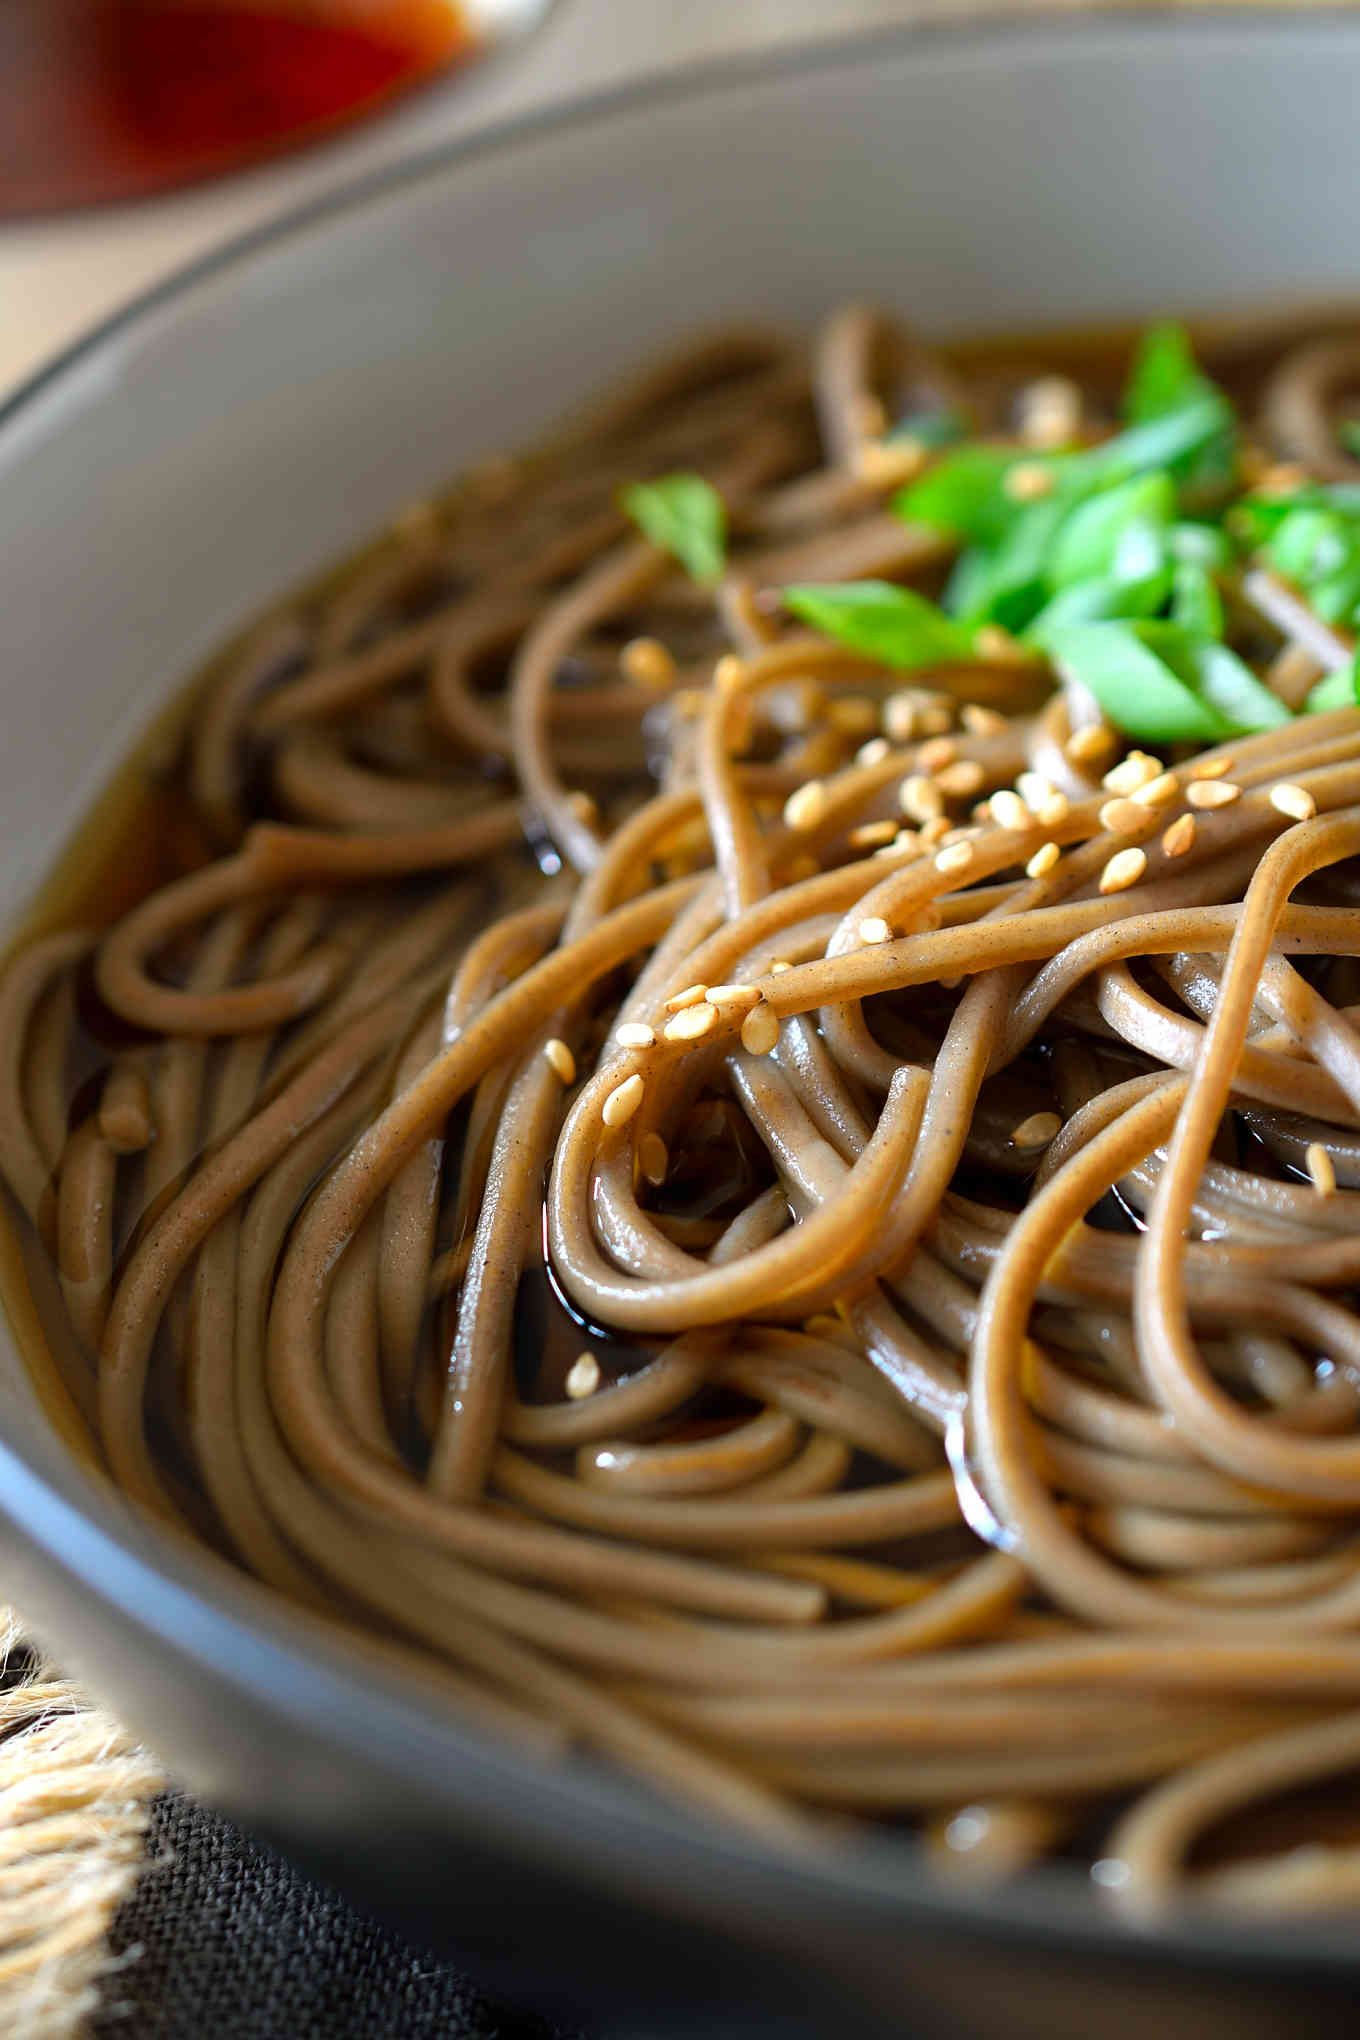 You don’t need to wait until New Year’s Eve to make this delicious toshikoshi soba recipe. This dish is extremely easy to make with just a simple and wonderful umami broth and nutty soba noodles. Sprinkle over some sesame seeds and chopped green onion for a bit of colour and crunch and you’ve got a lip-smacking, steaming bowl of soba noodle soup.